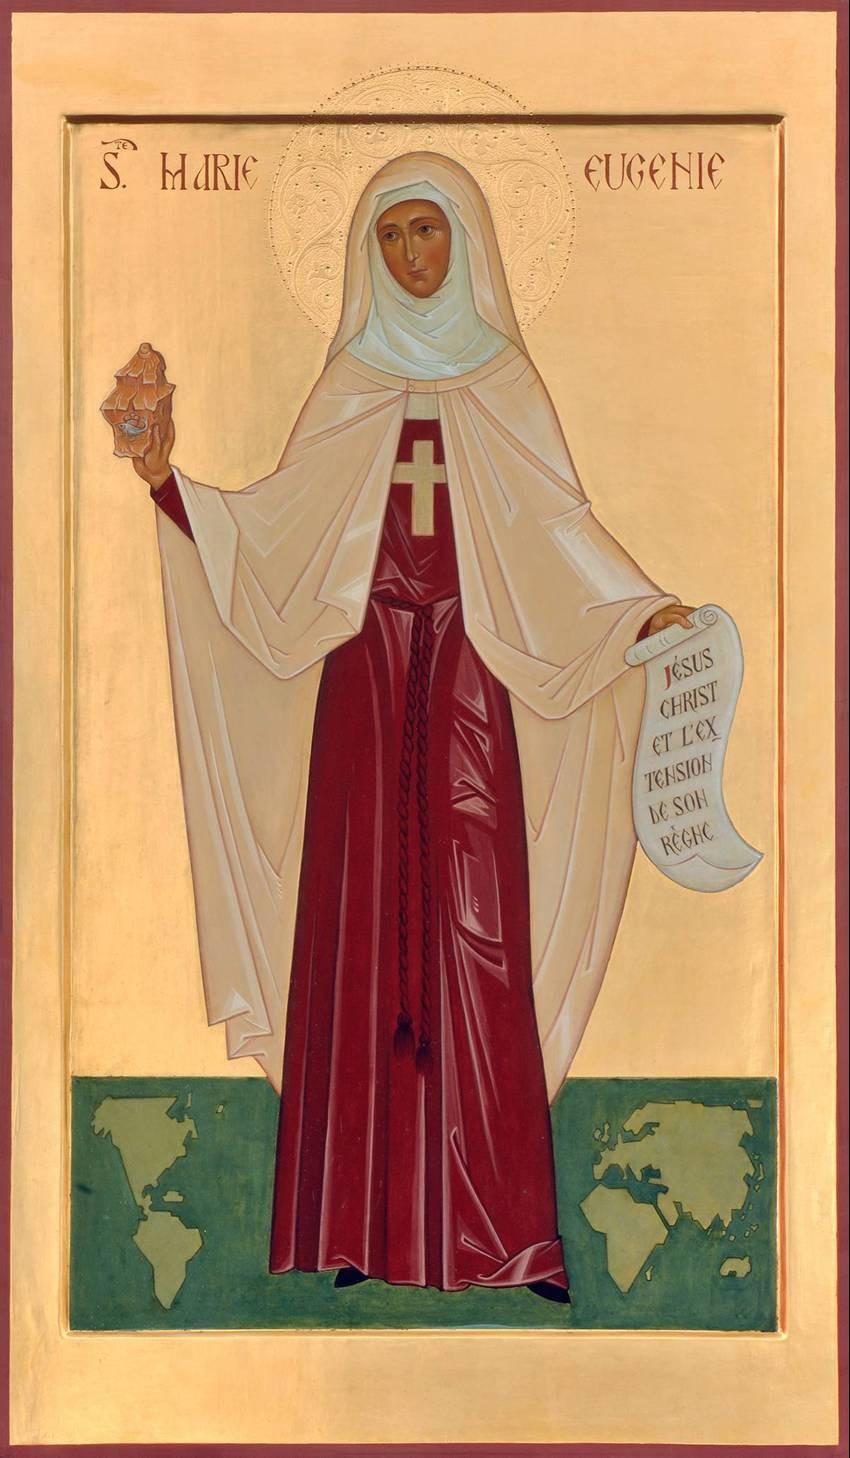 Assumption s Very Own Saint: Marie Eugénie Milleret Presentation made by Sr. Nuala Cotter, R.A. Here is Saint Marie Eugénie Milleret an image that most of you have now seen on the beautiful posters made for this event.